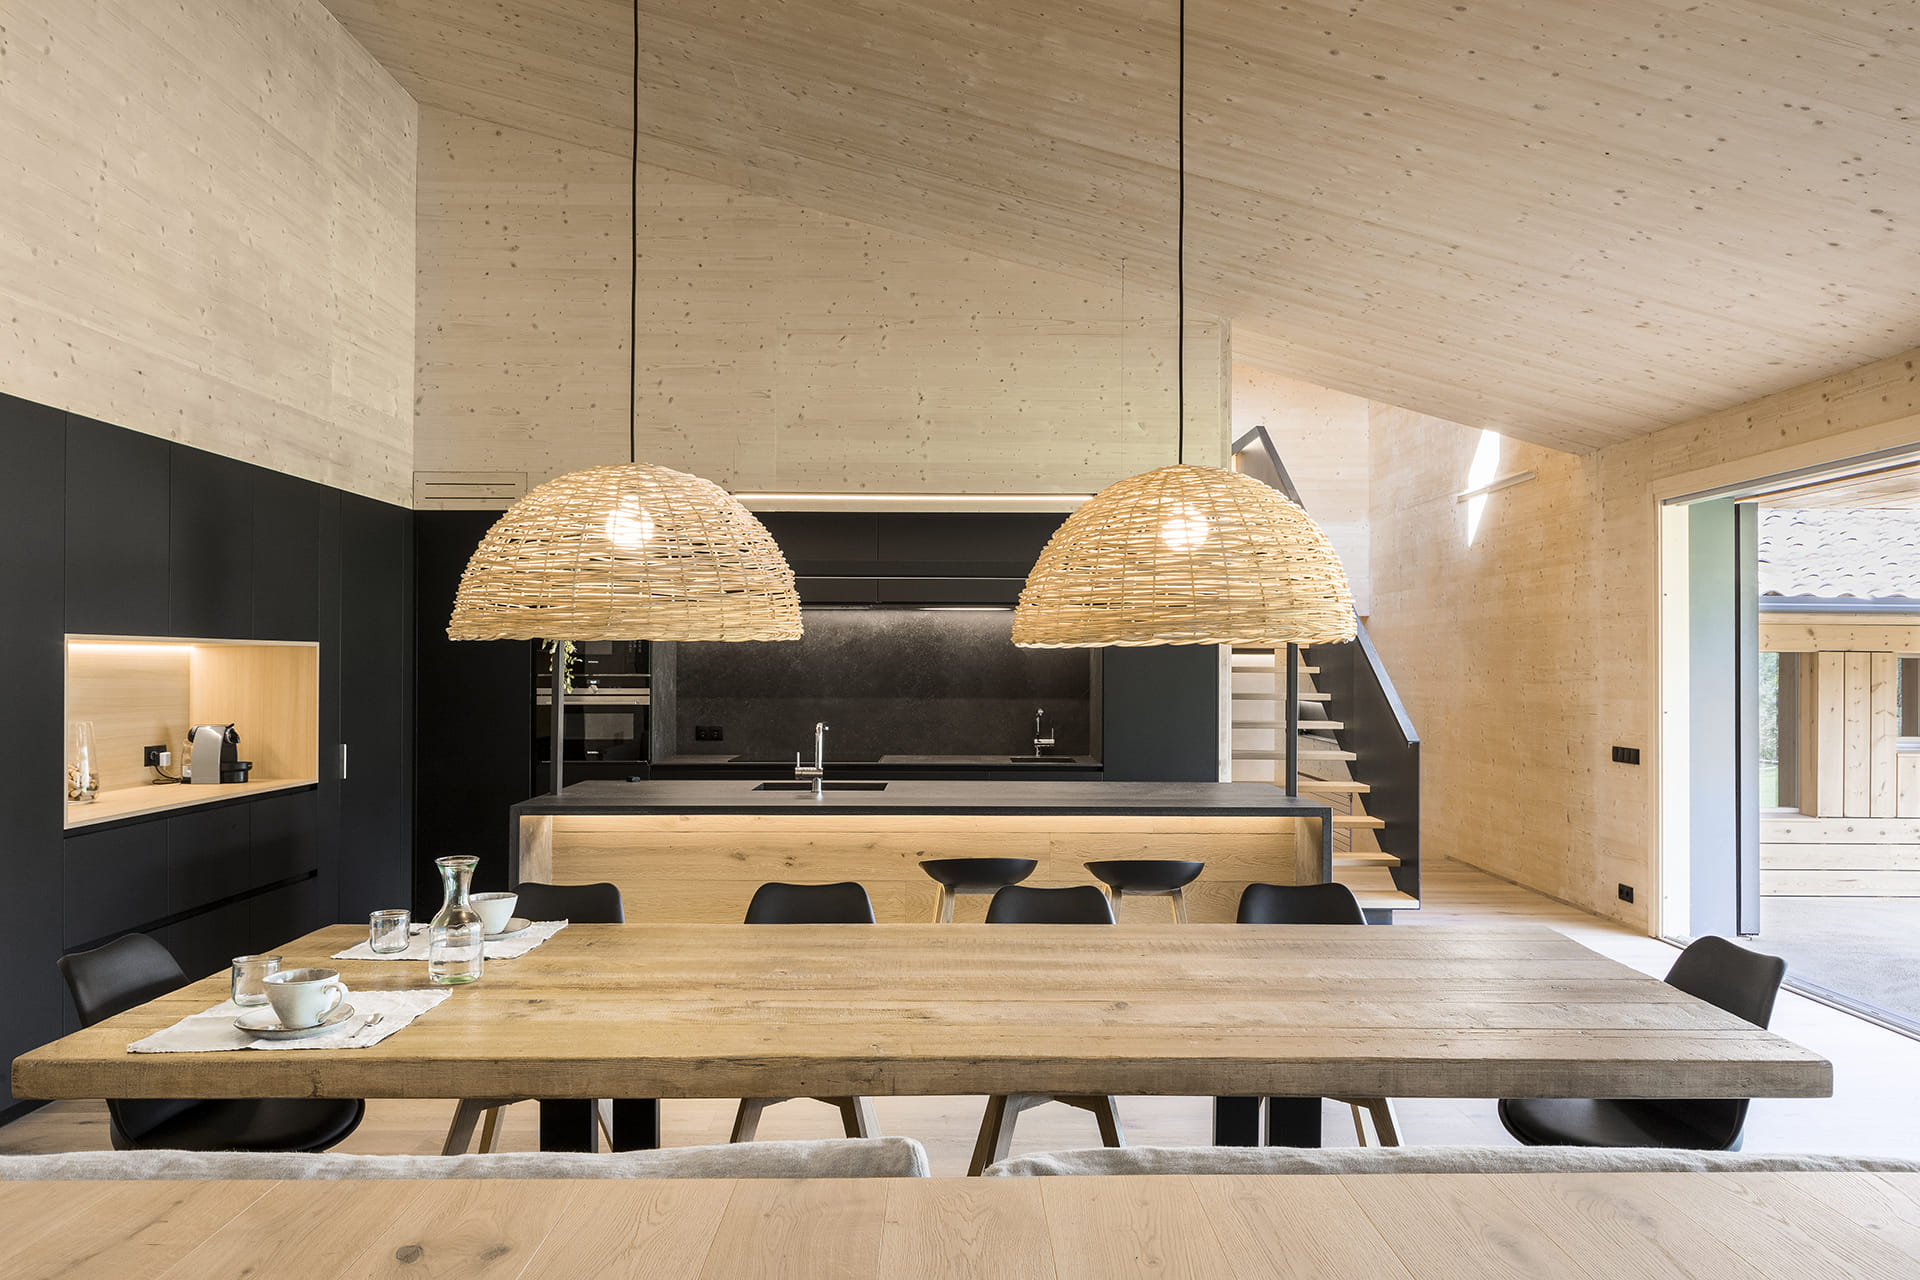 Santos design for open-plan kitchen in black and wood